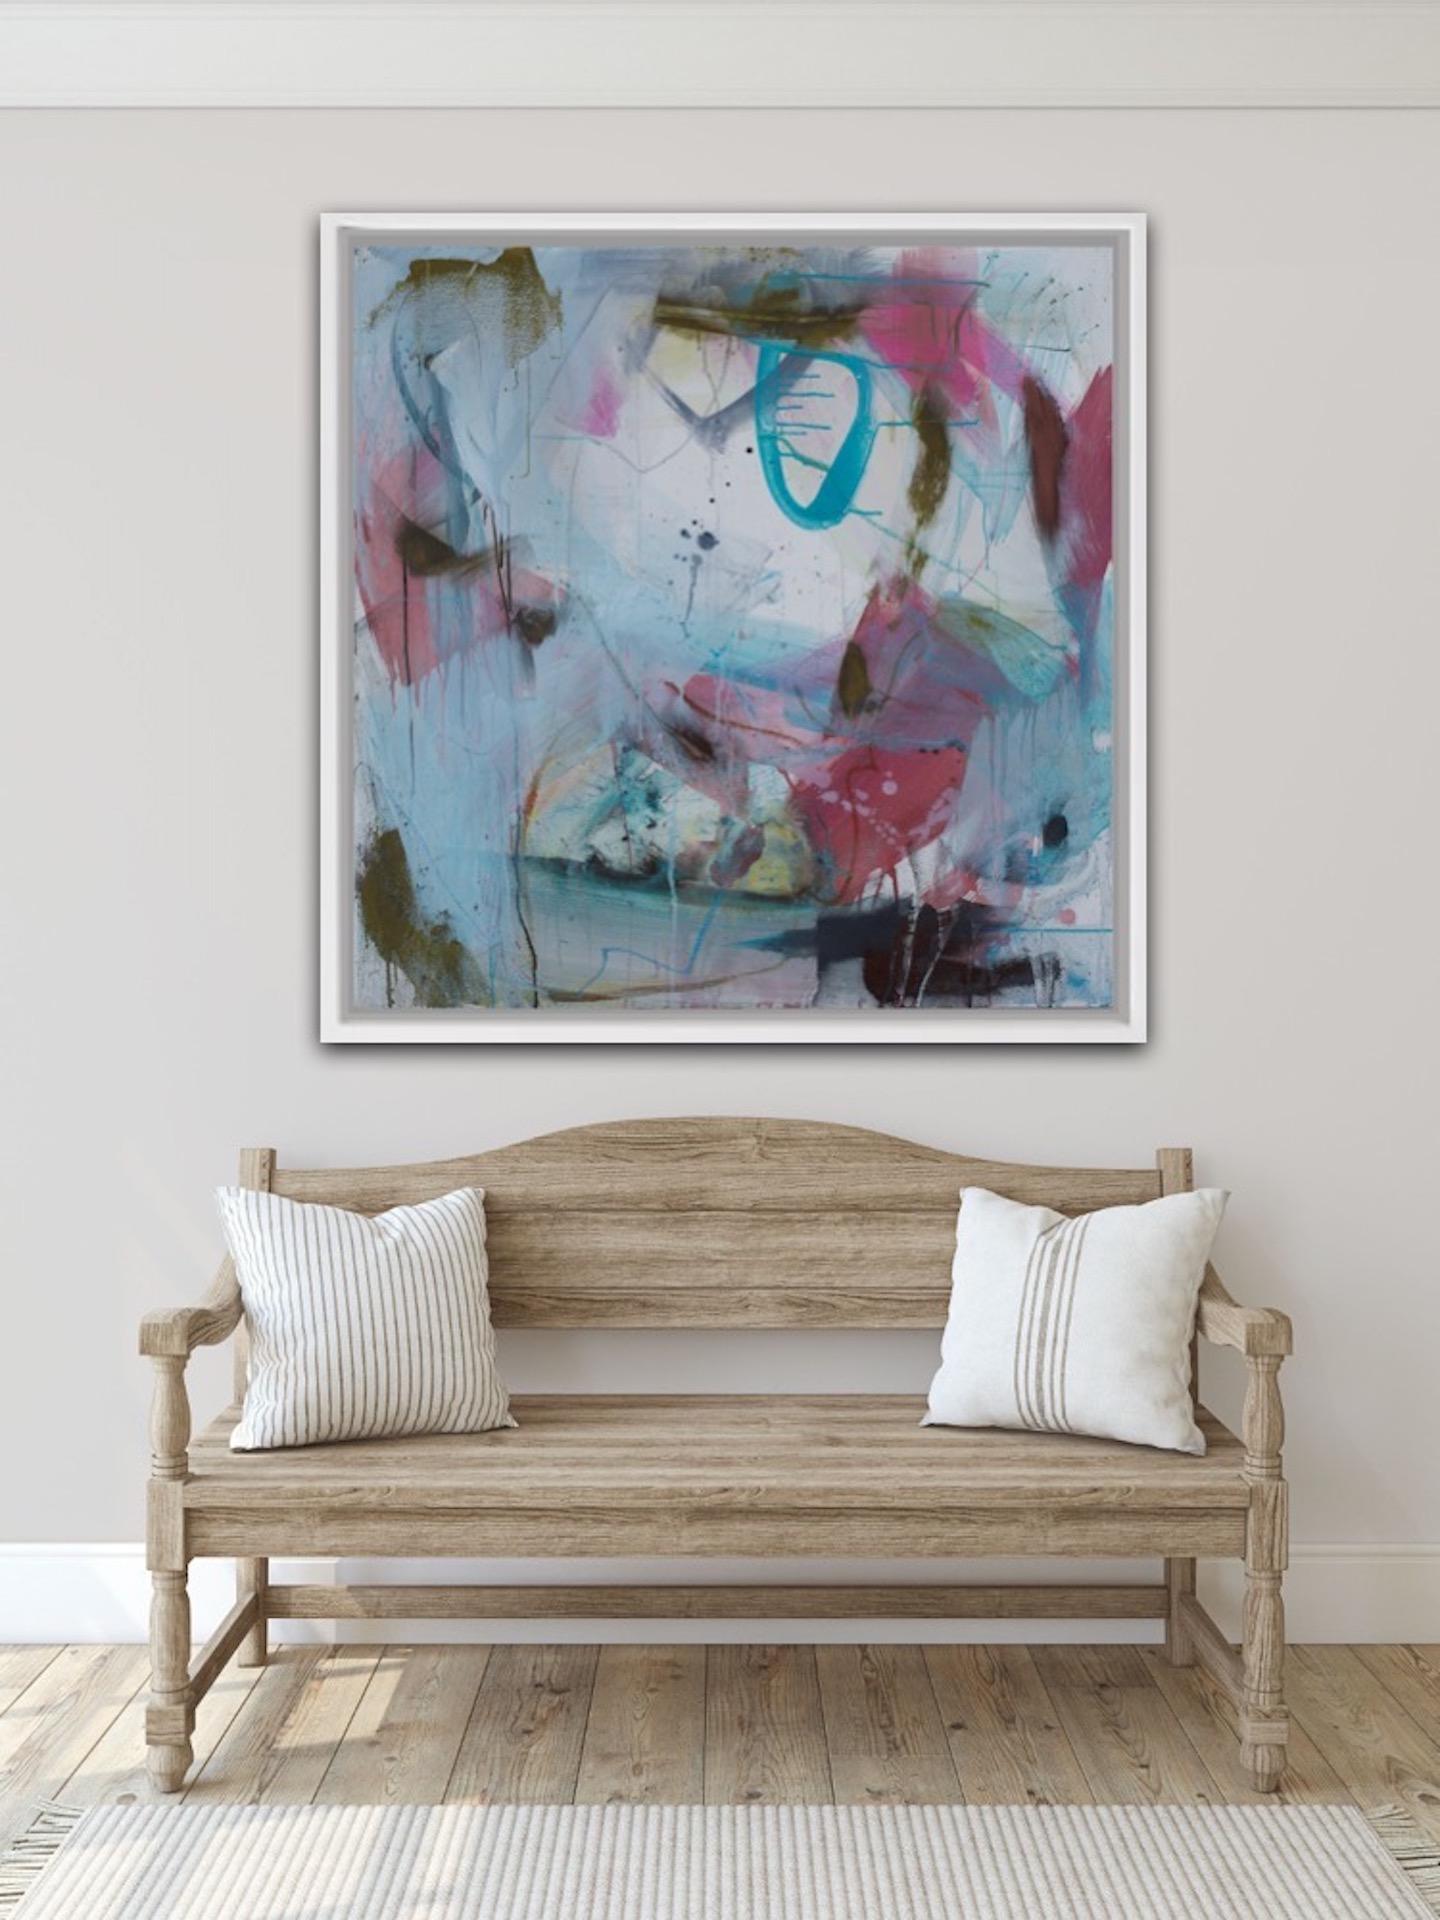 Judith Brenner
Spello 
Acrylic Paint and mIxed Media on Canvas
Canvas Size: H 105cm x W 105cm 
Sold Unframed
Please note that insitu images re purely an indication of how a piece may look.

Spello is an contemporary abstract painting by Judith